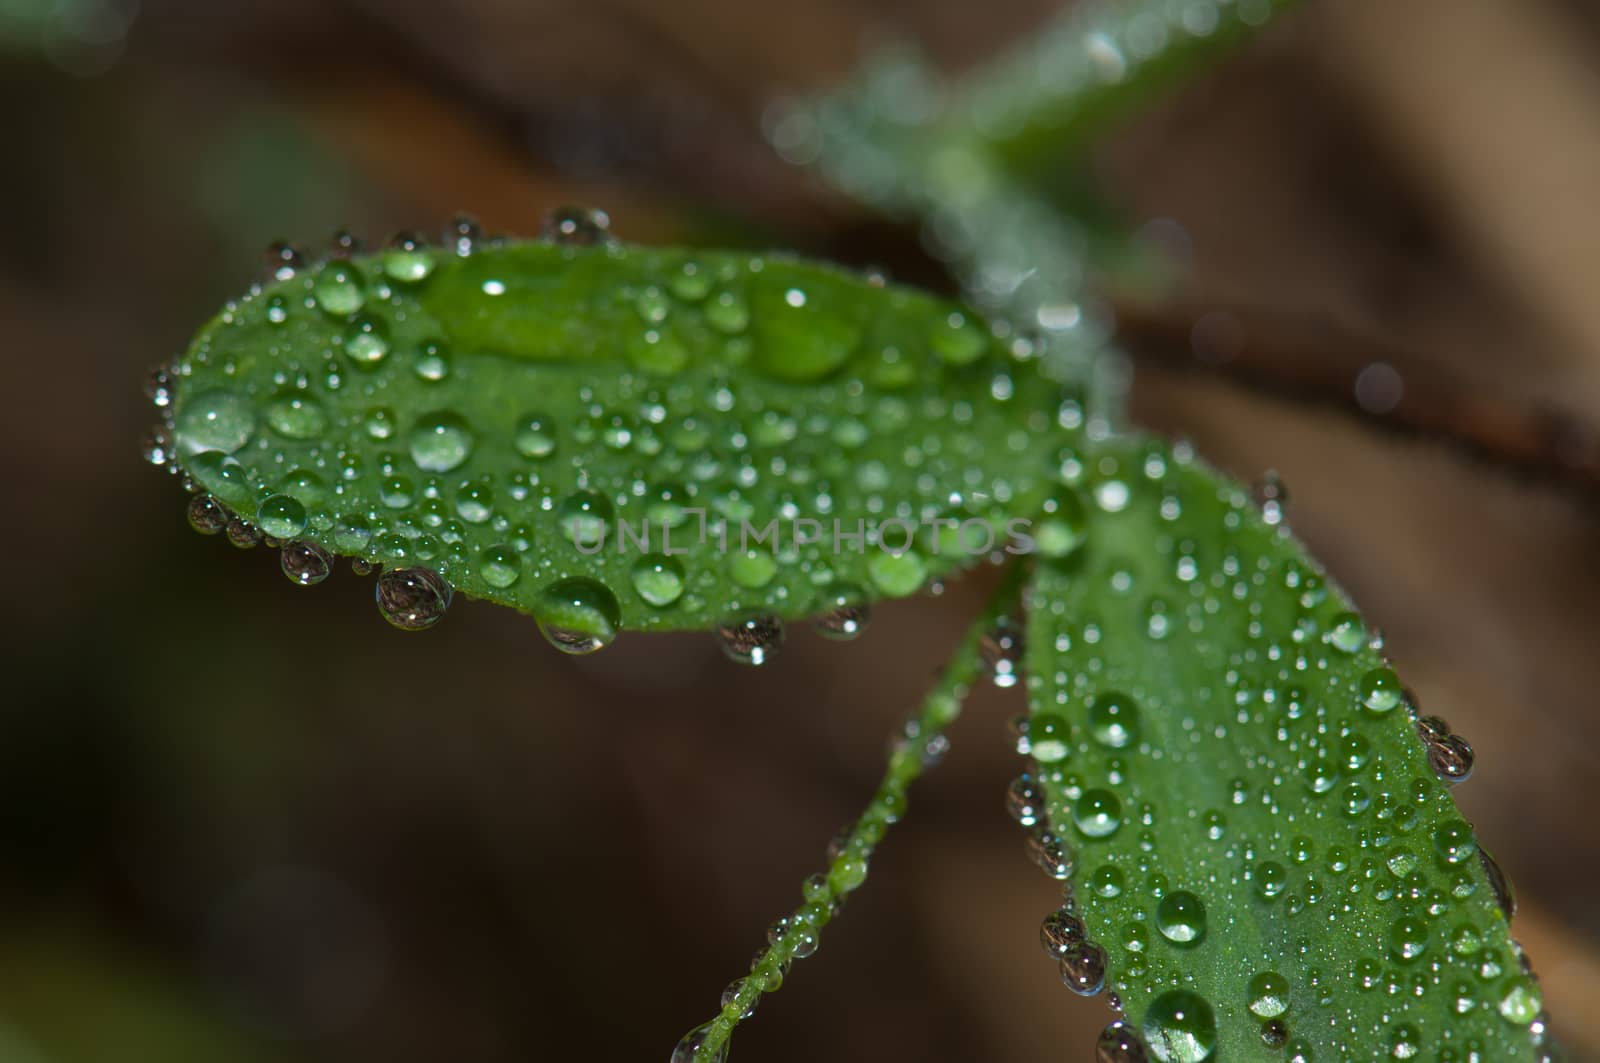 Leaves covered with dew drops. by VictorSuarez